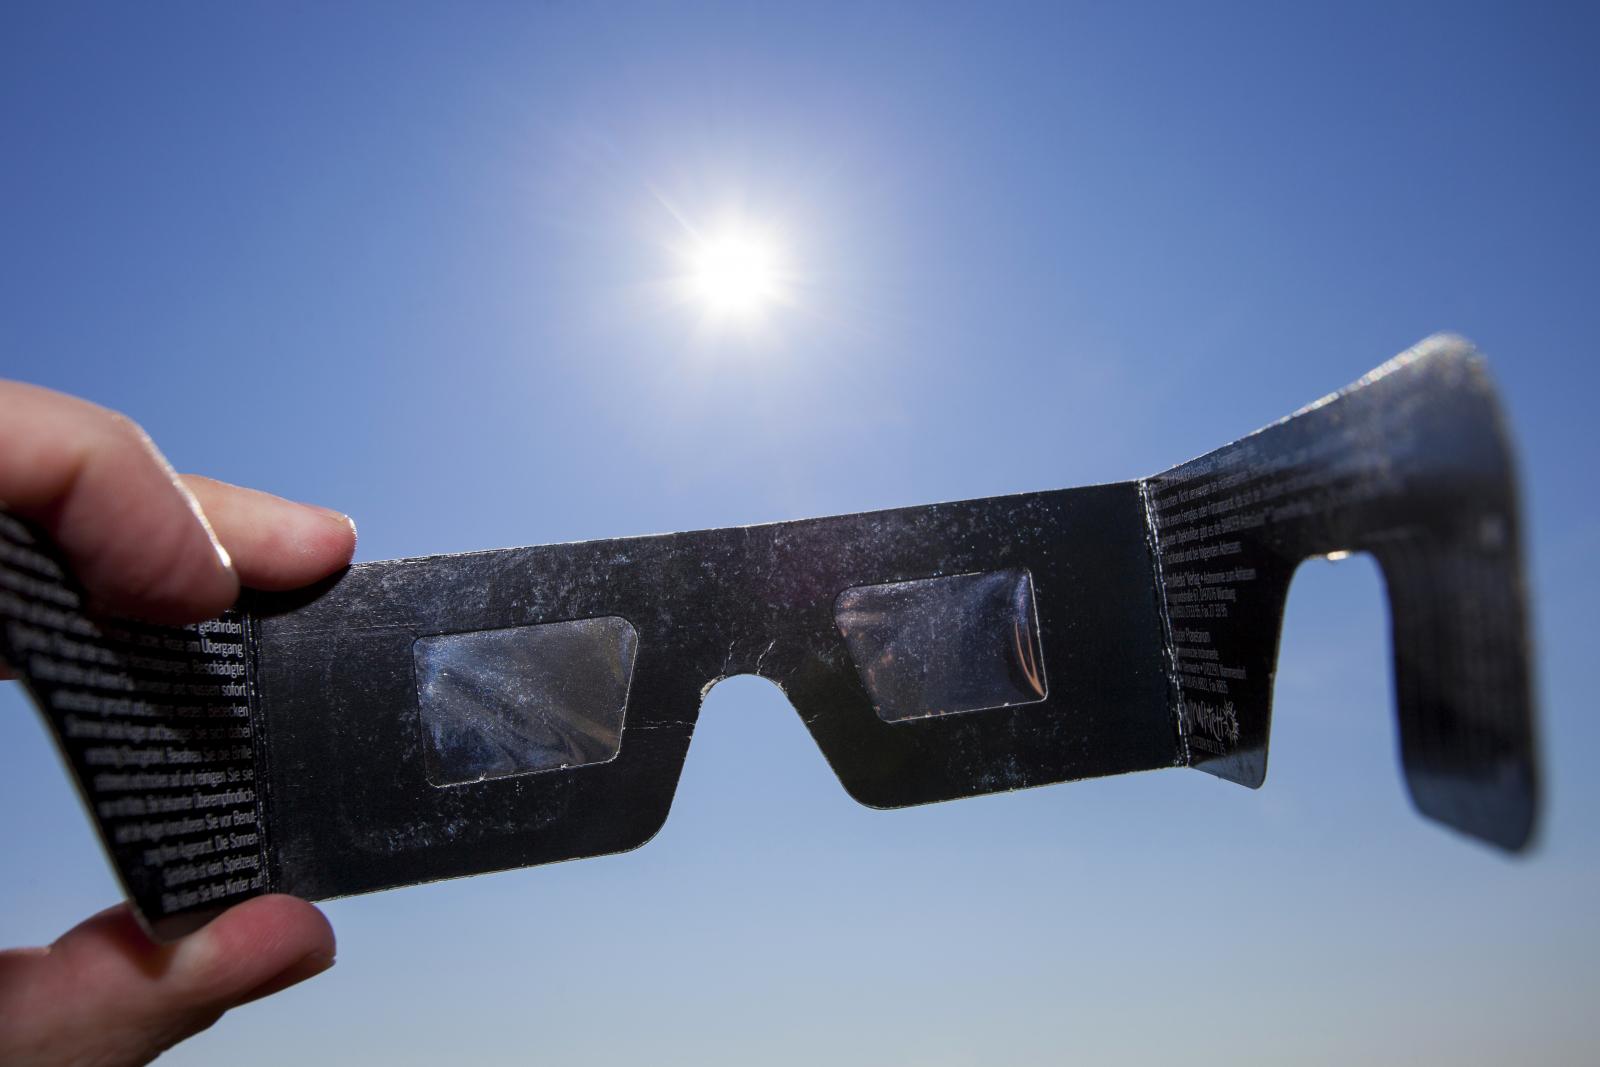 Use eclipse glasses or project the suns image onto a piece of paper to view the solar eclipse